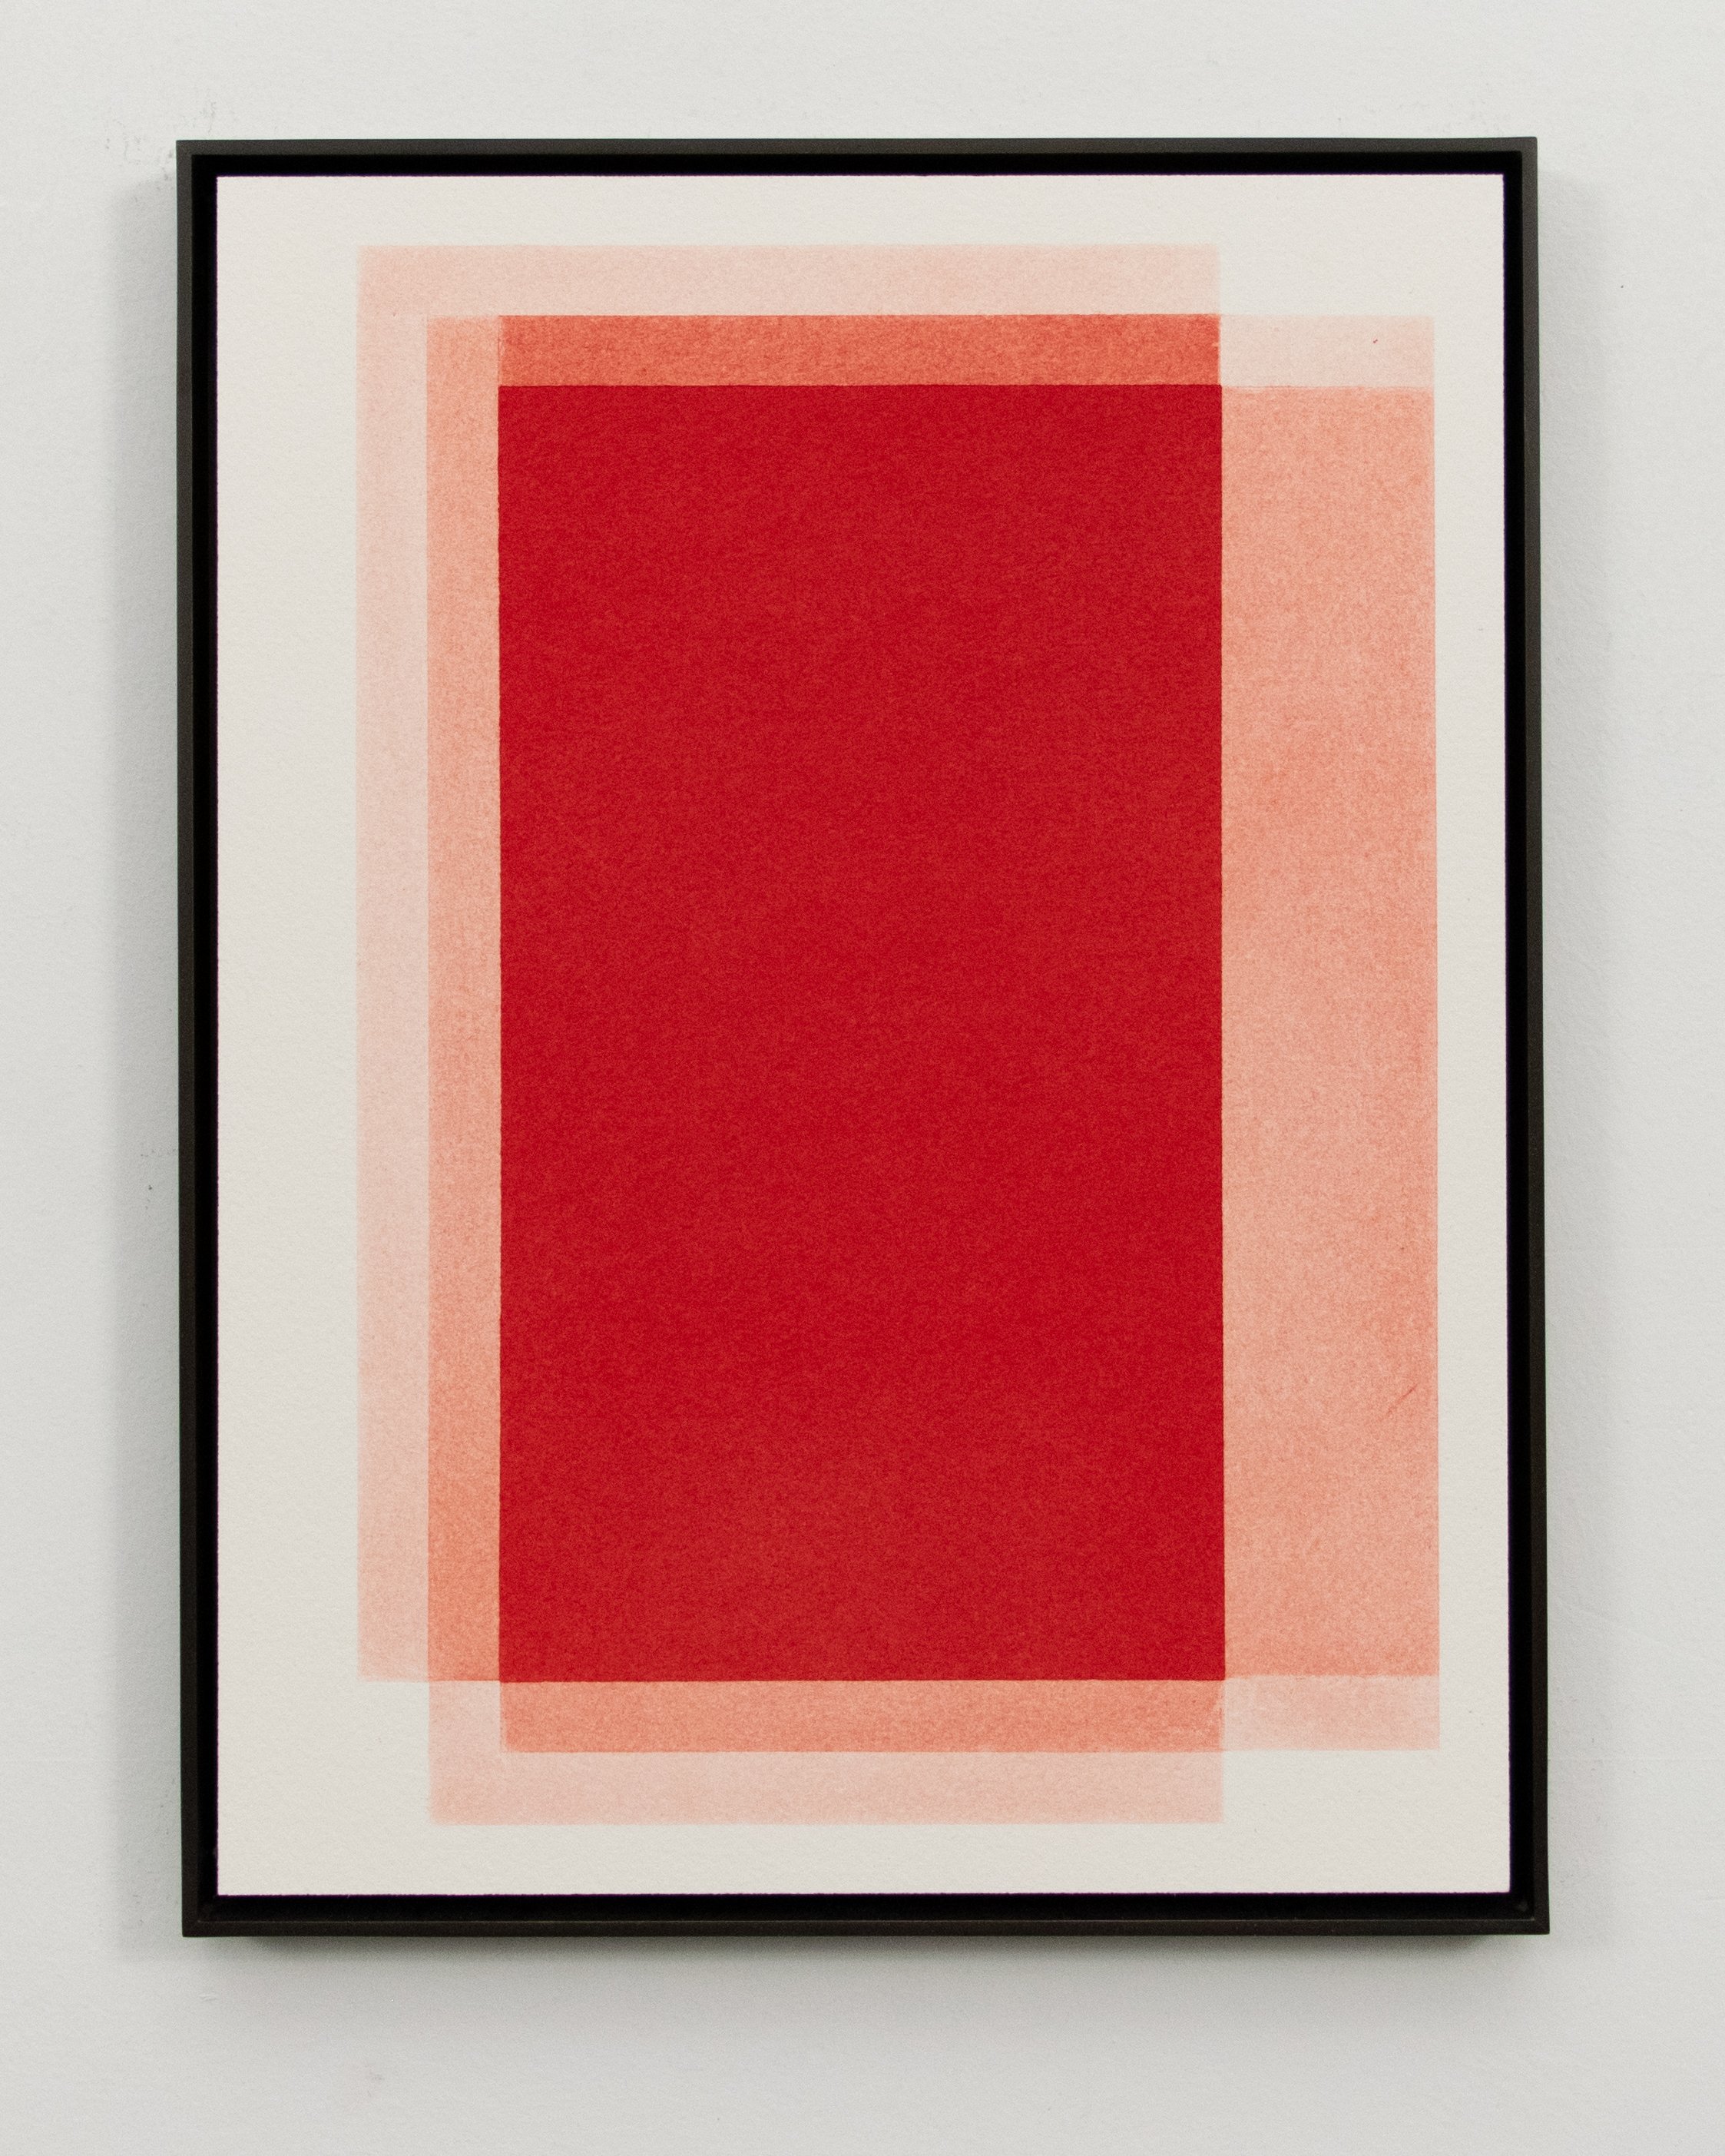  Stephen Somple  17 5 9 11 Red , 2022 Graphite and pigment on paper with oxidized brass frame 9.5" x 12.5" x .5" 